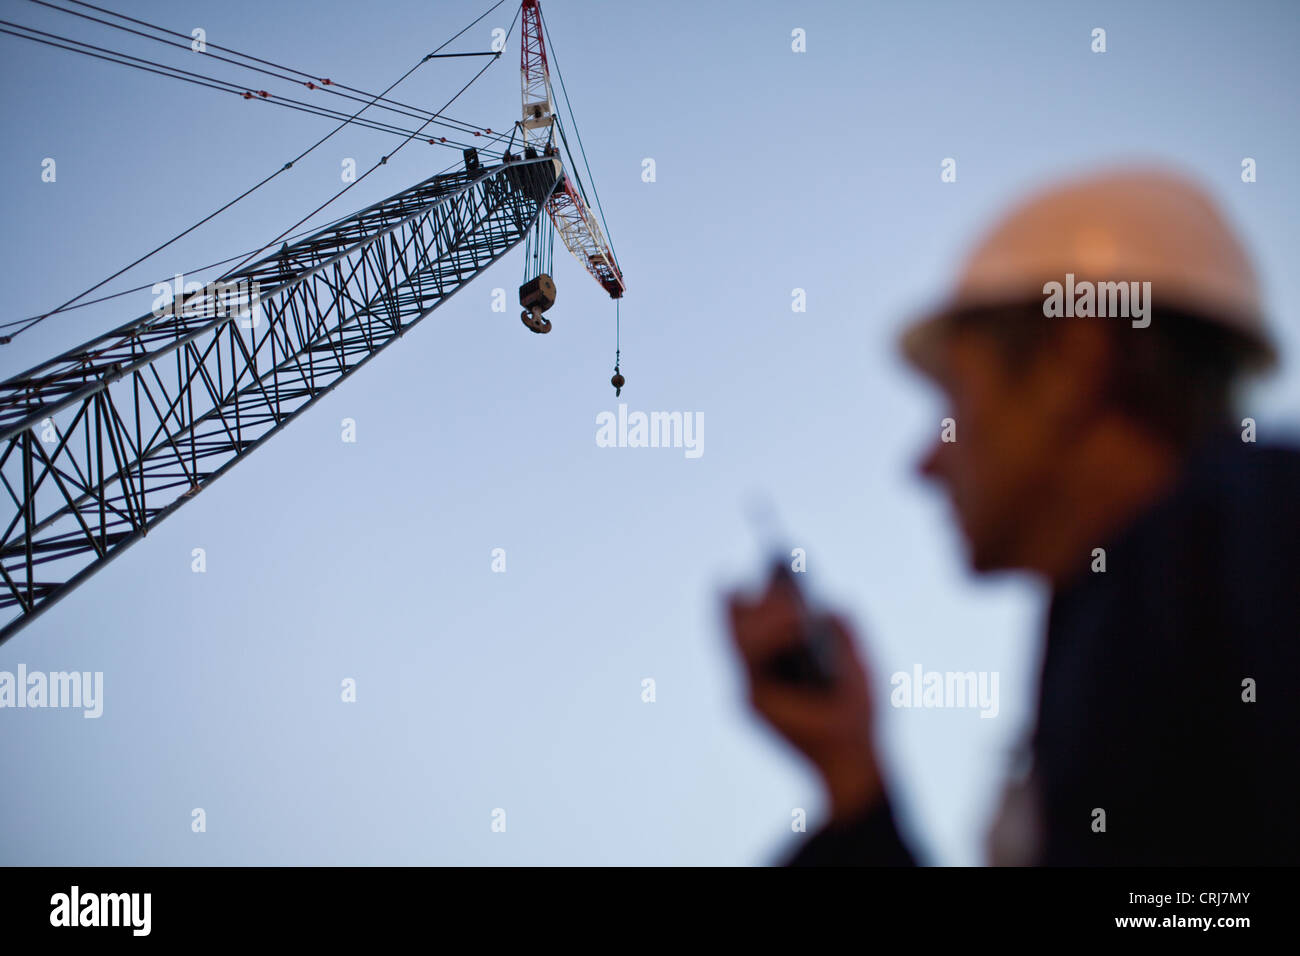 Crane over worker at oil refinery Stock Photo